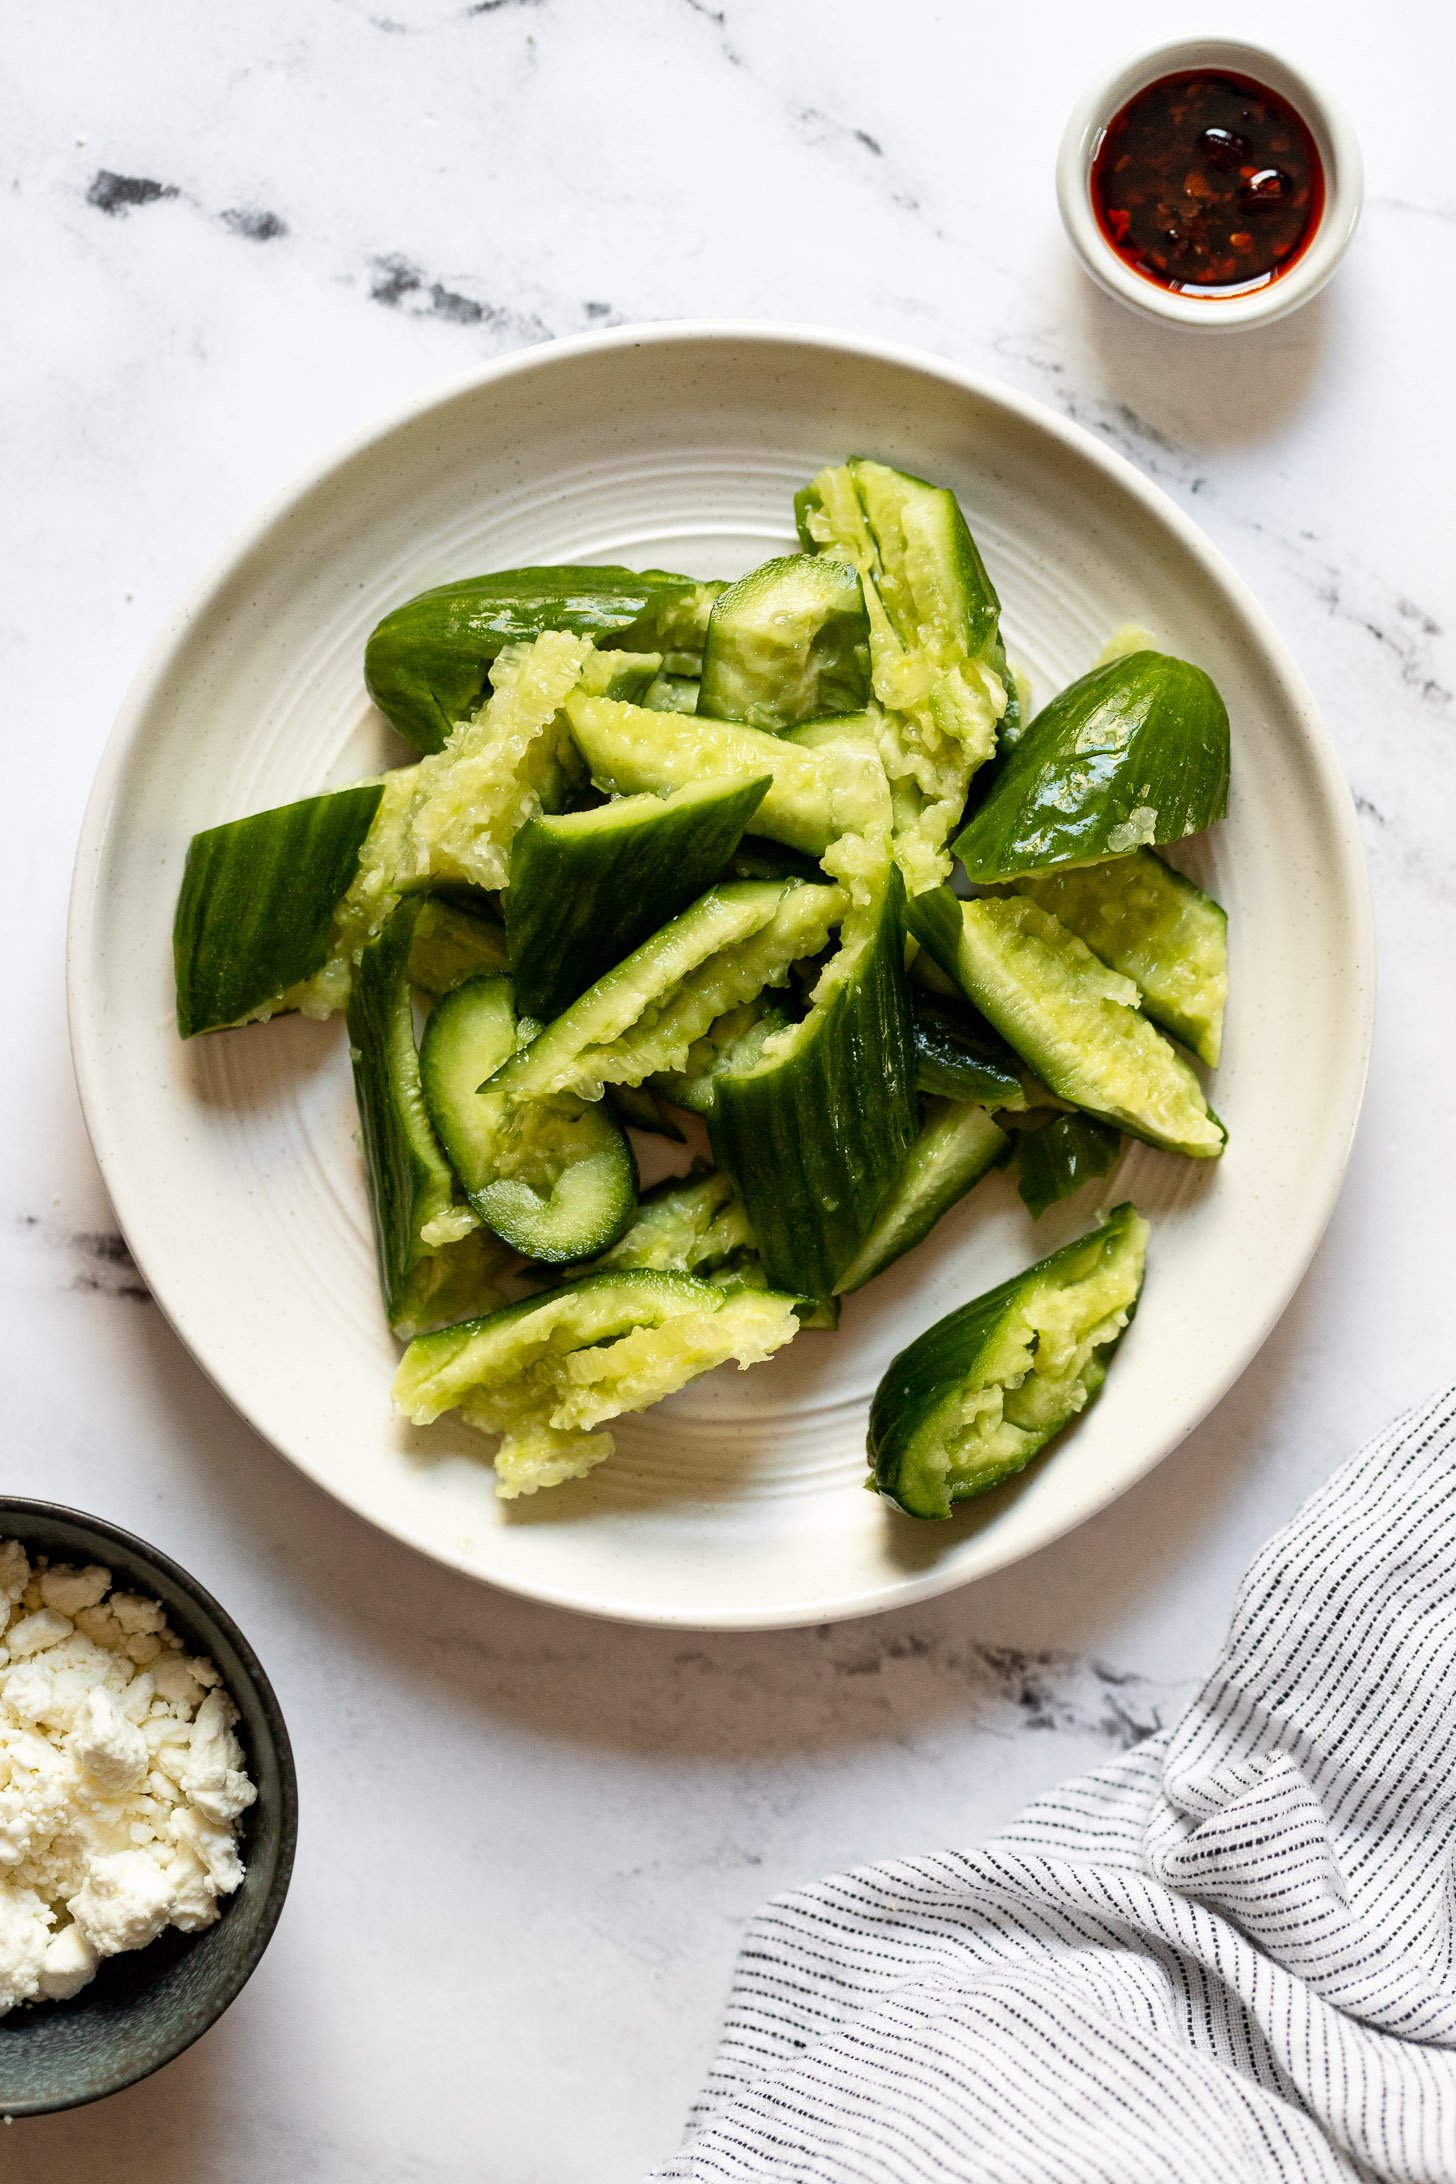 Plate of smashed cucumbers.